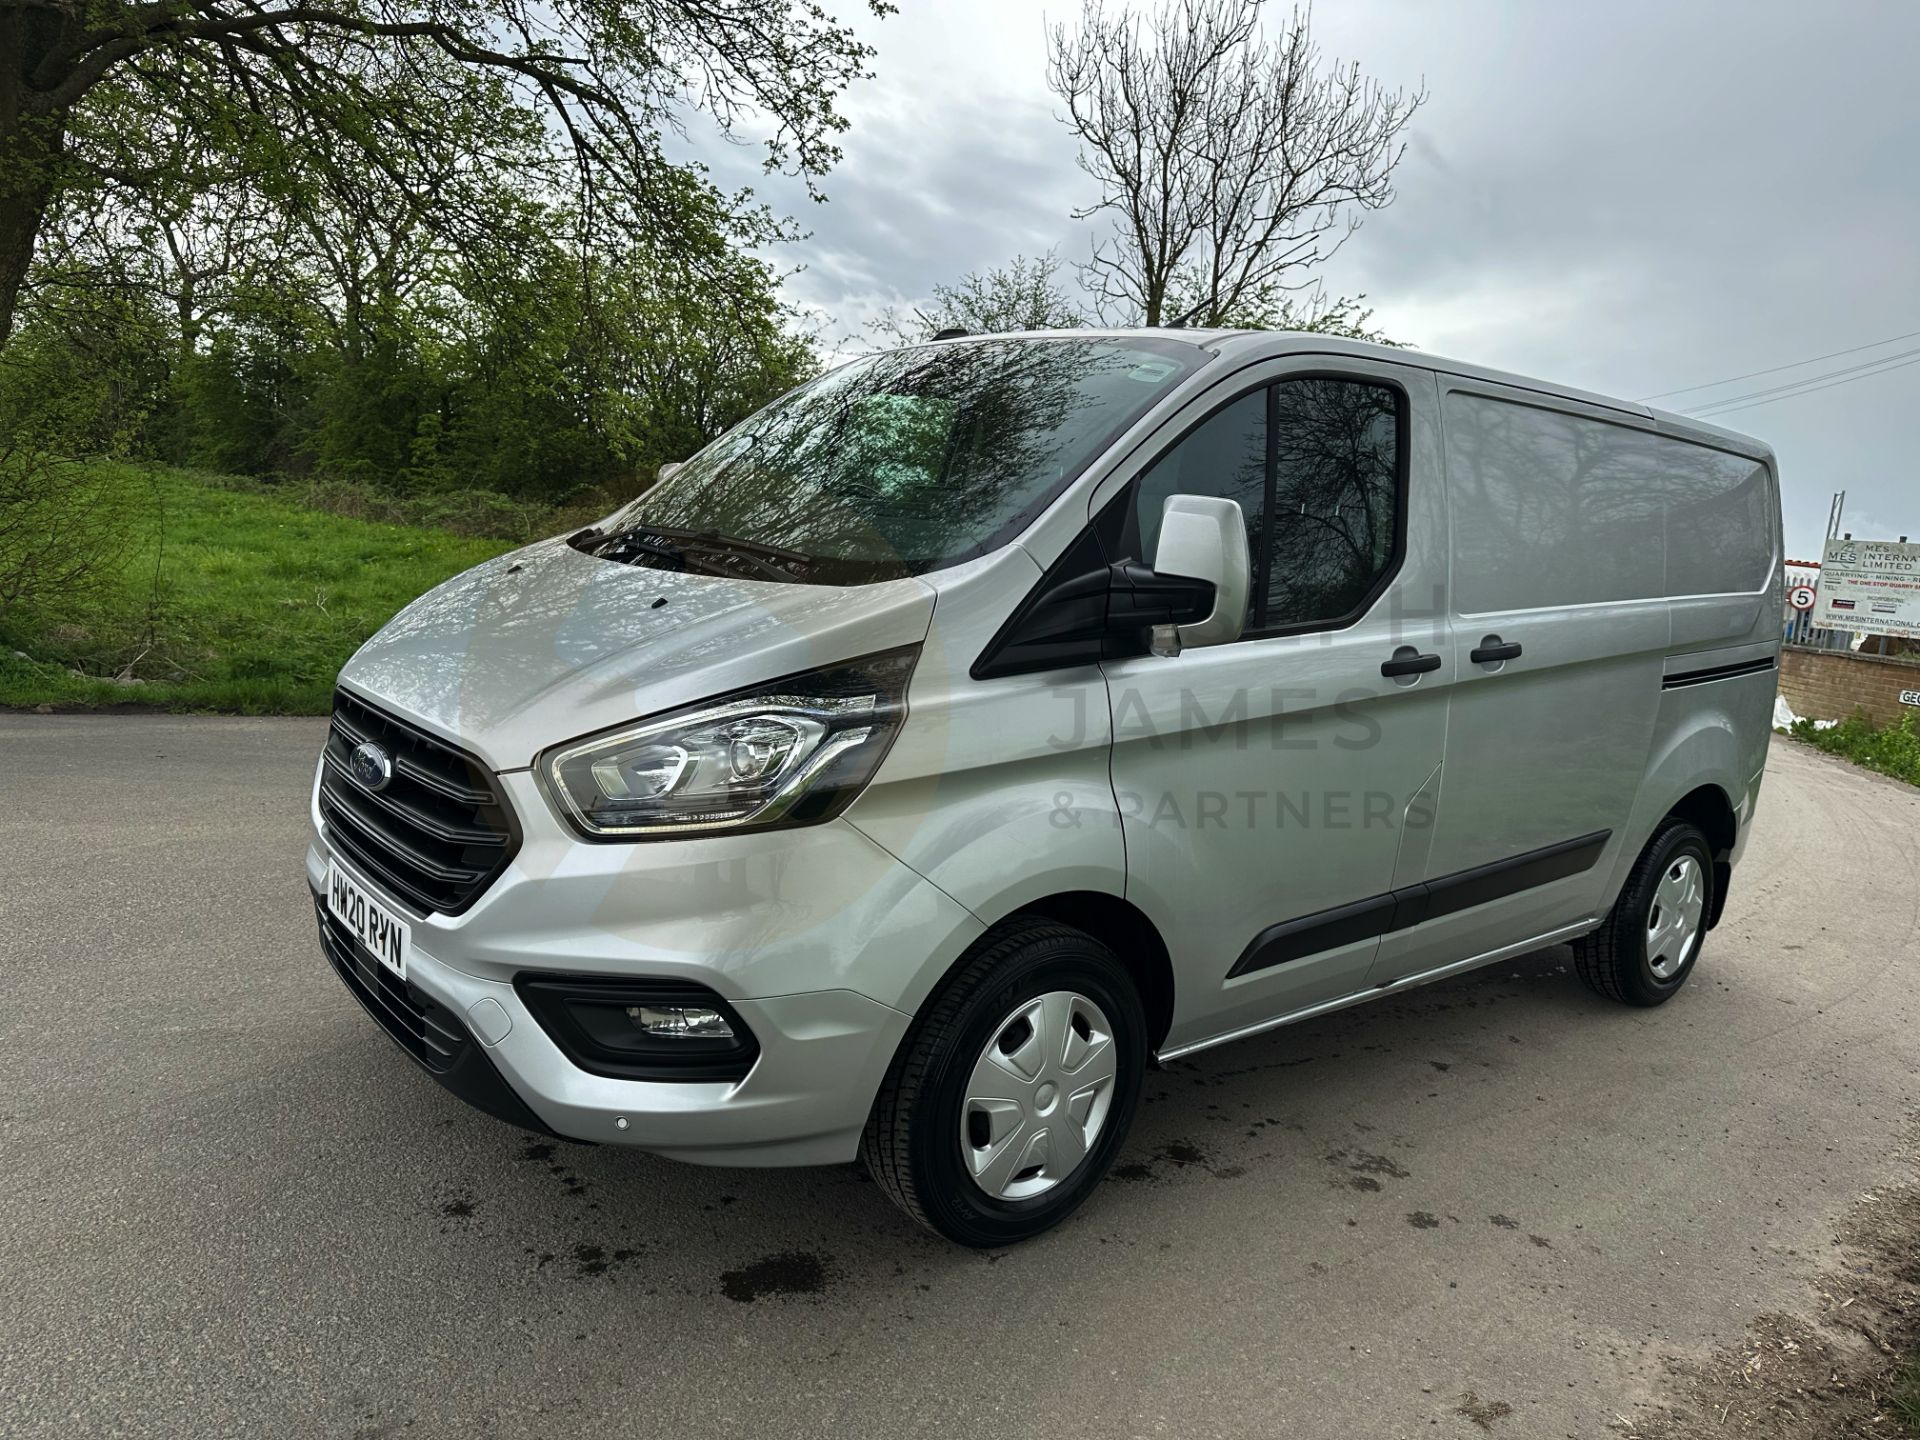 (ON SALE) FORD TRANSIT CUSTOM "TREND" 2.0TDCI (130) 20 REG -1 OWNER- SILVER -GREAT SPEC -LOW MILEAGE - Image 6 of 38